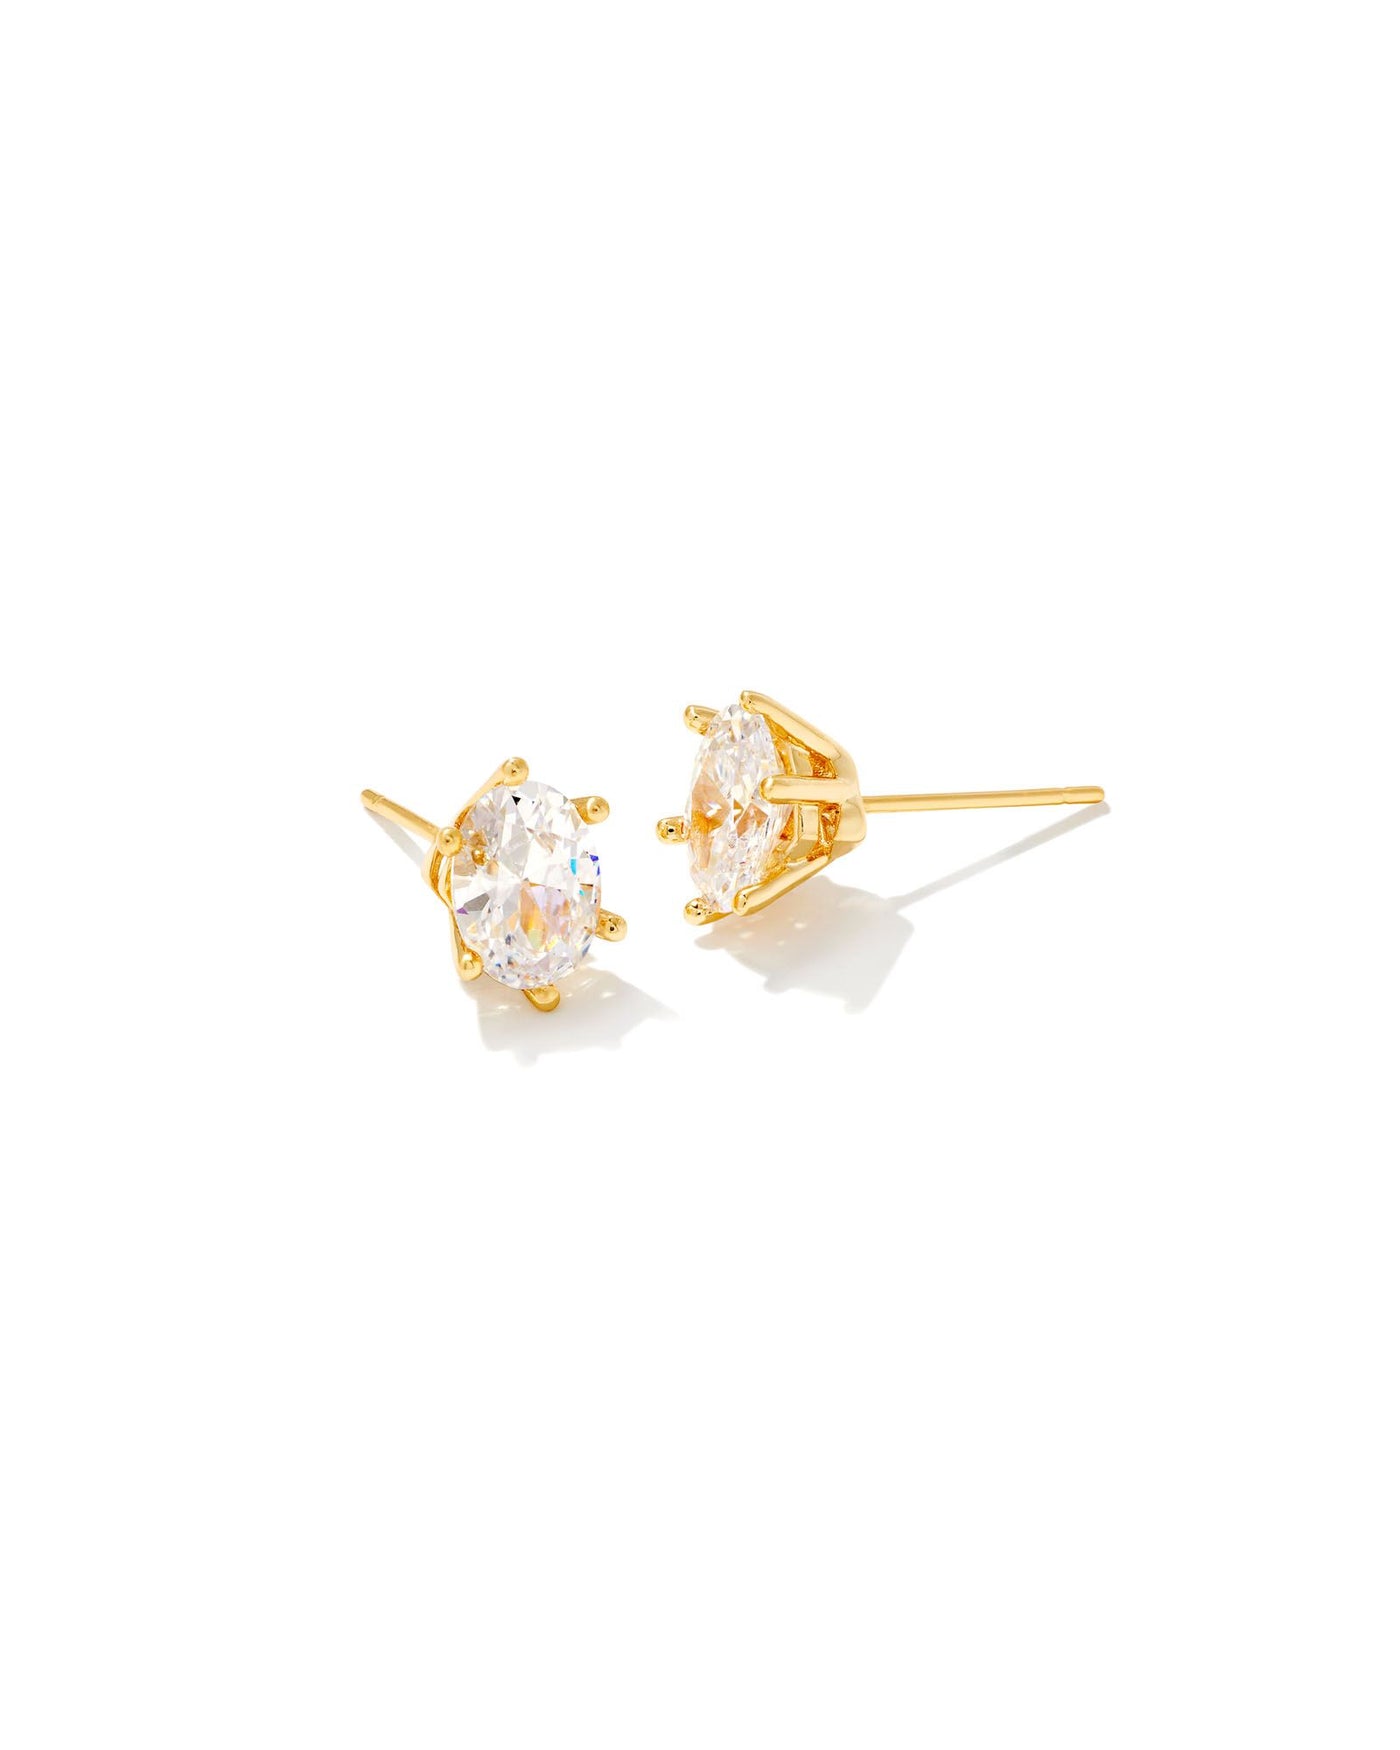 Kendra Scott Cailin Crystal Stud Earrings-Earrings-Kendra Scott-Market Street Nest, Fashionable Clothing, Shoes and Home Décor Located in Mabank, TX